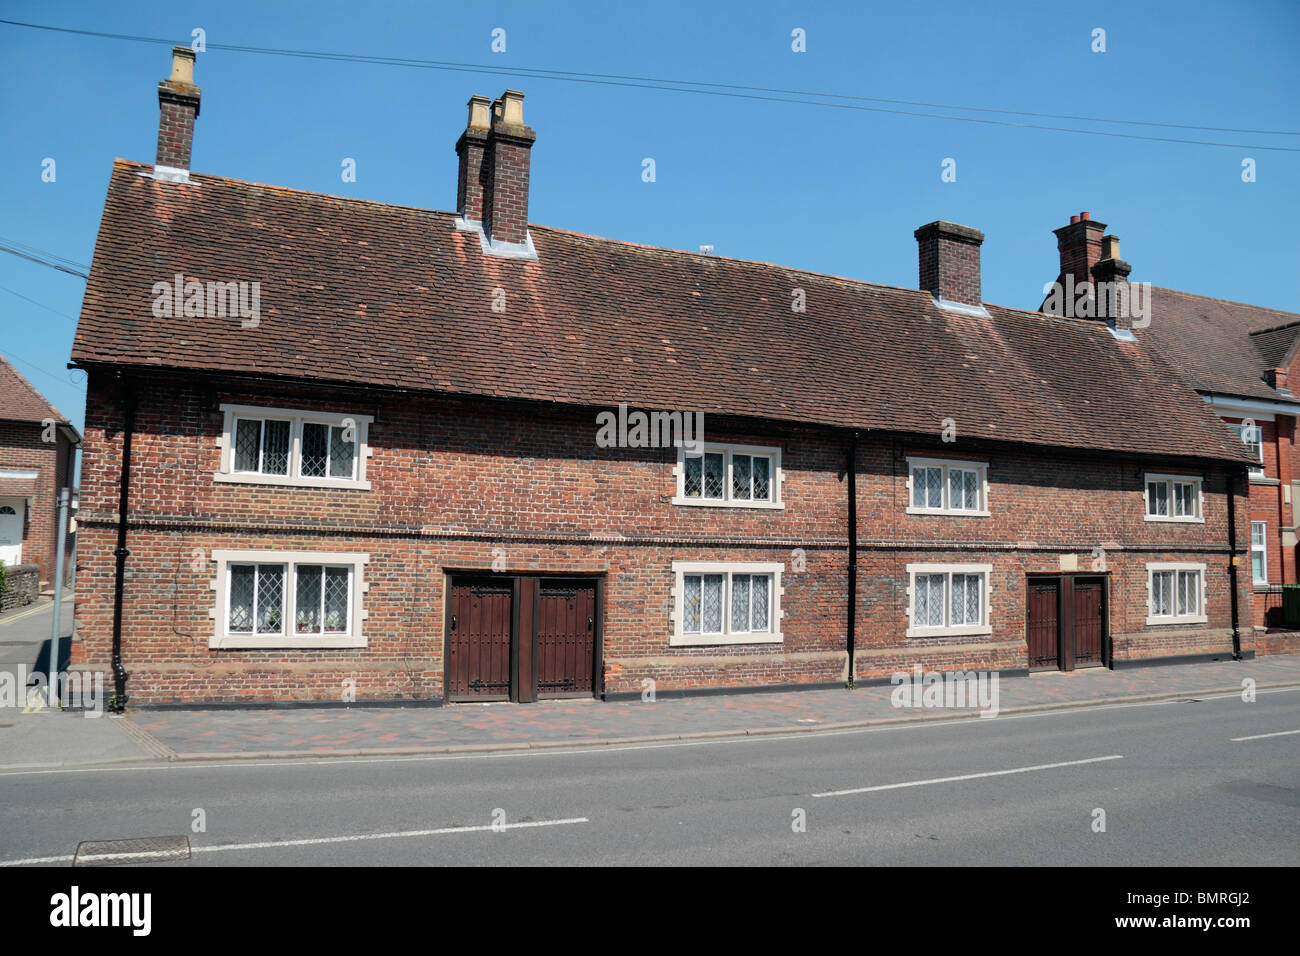 Terraced cottages built in the 17th Century, bequethed by Thomas Geale, in Church Street, Alton, Hampshire, UK. Stock Photo